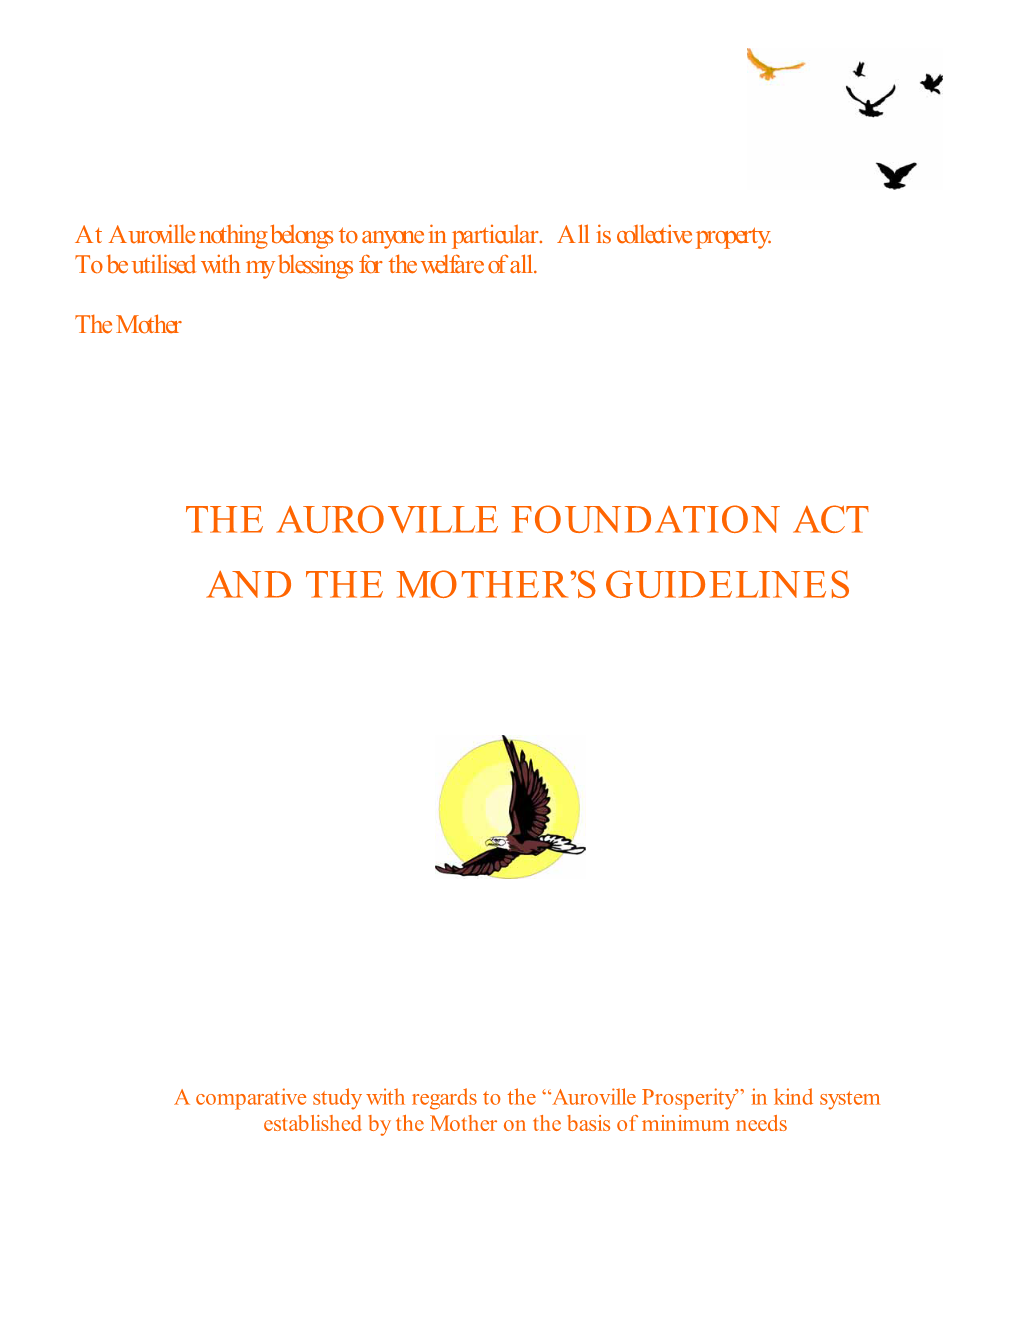 The Auroville Foundation Act and the Mother's Guidelines